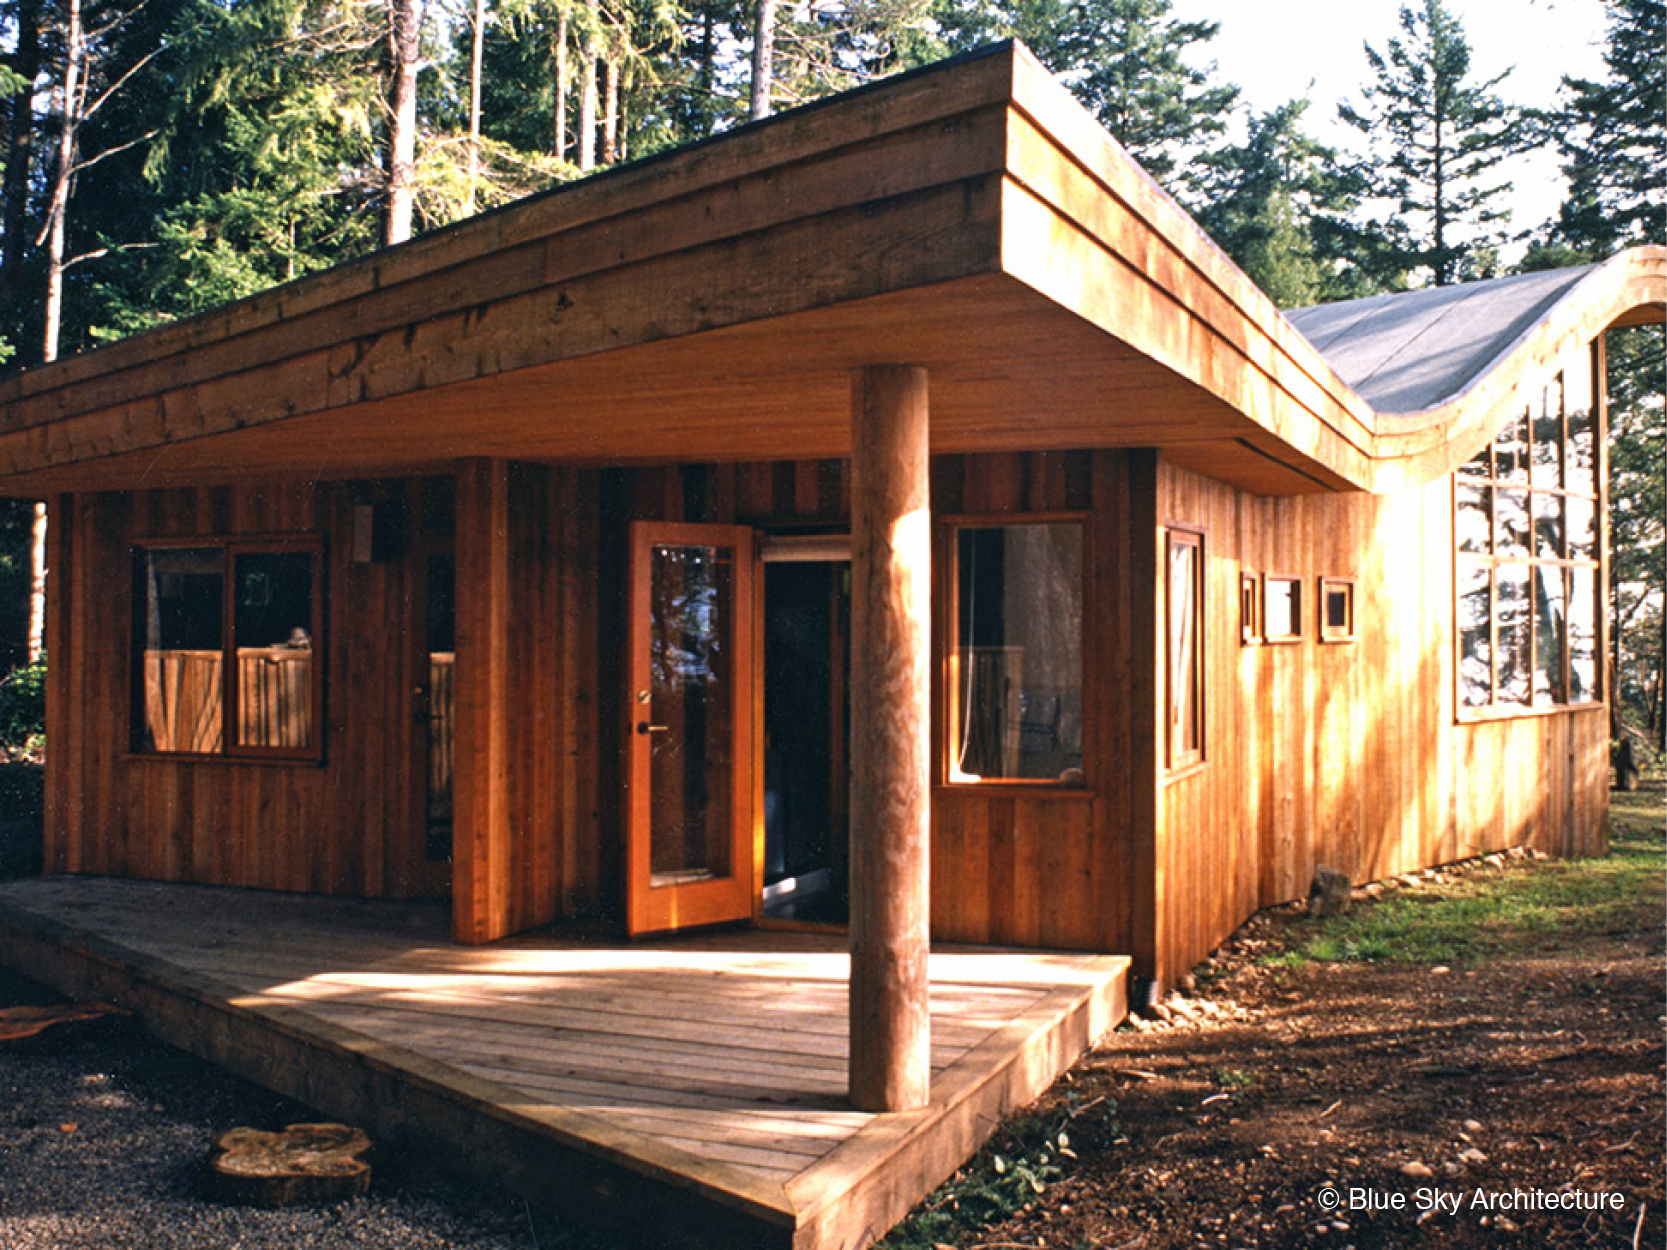 Entrance and Deck with Heavy Timber and Natural Log